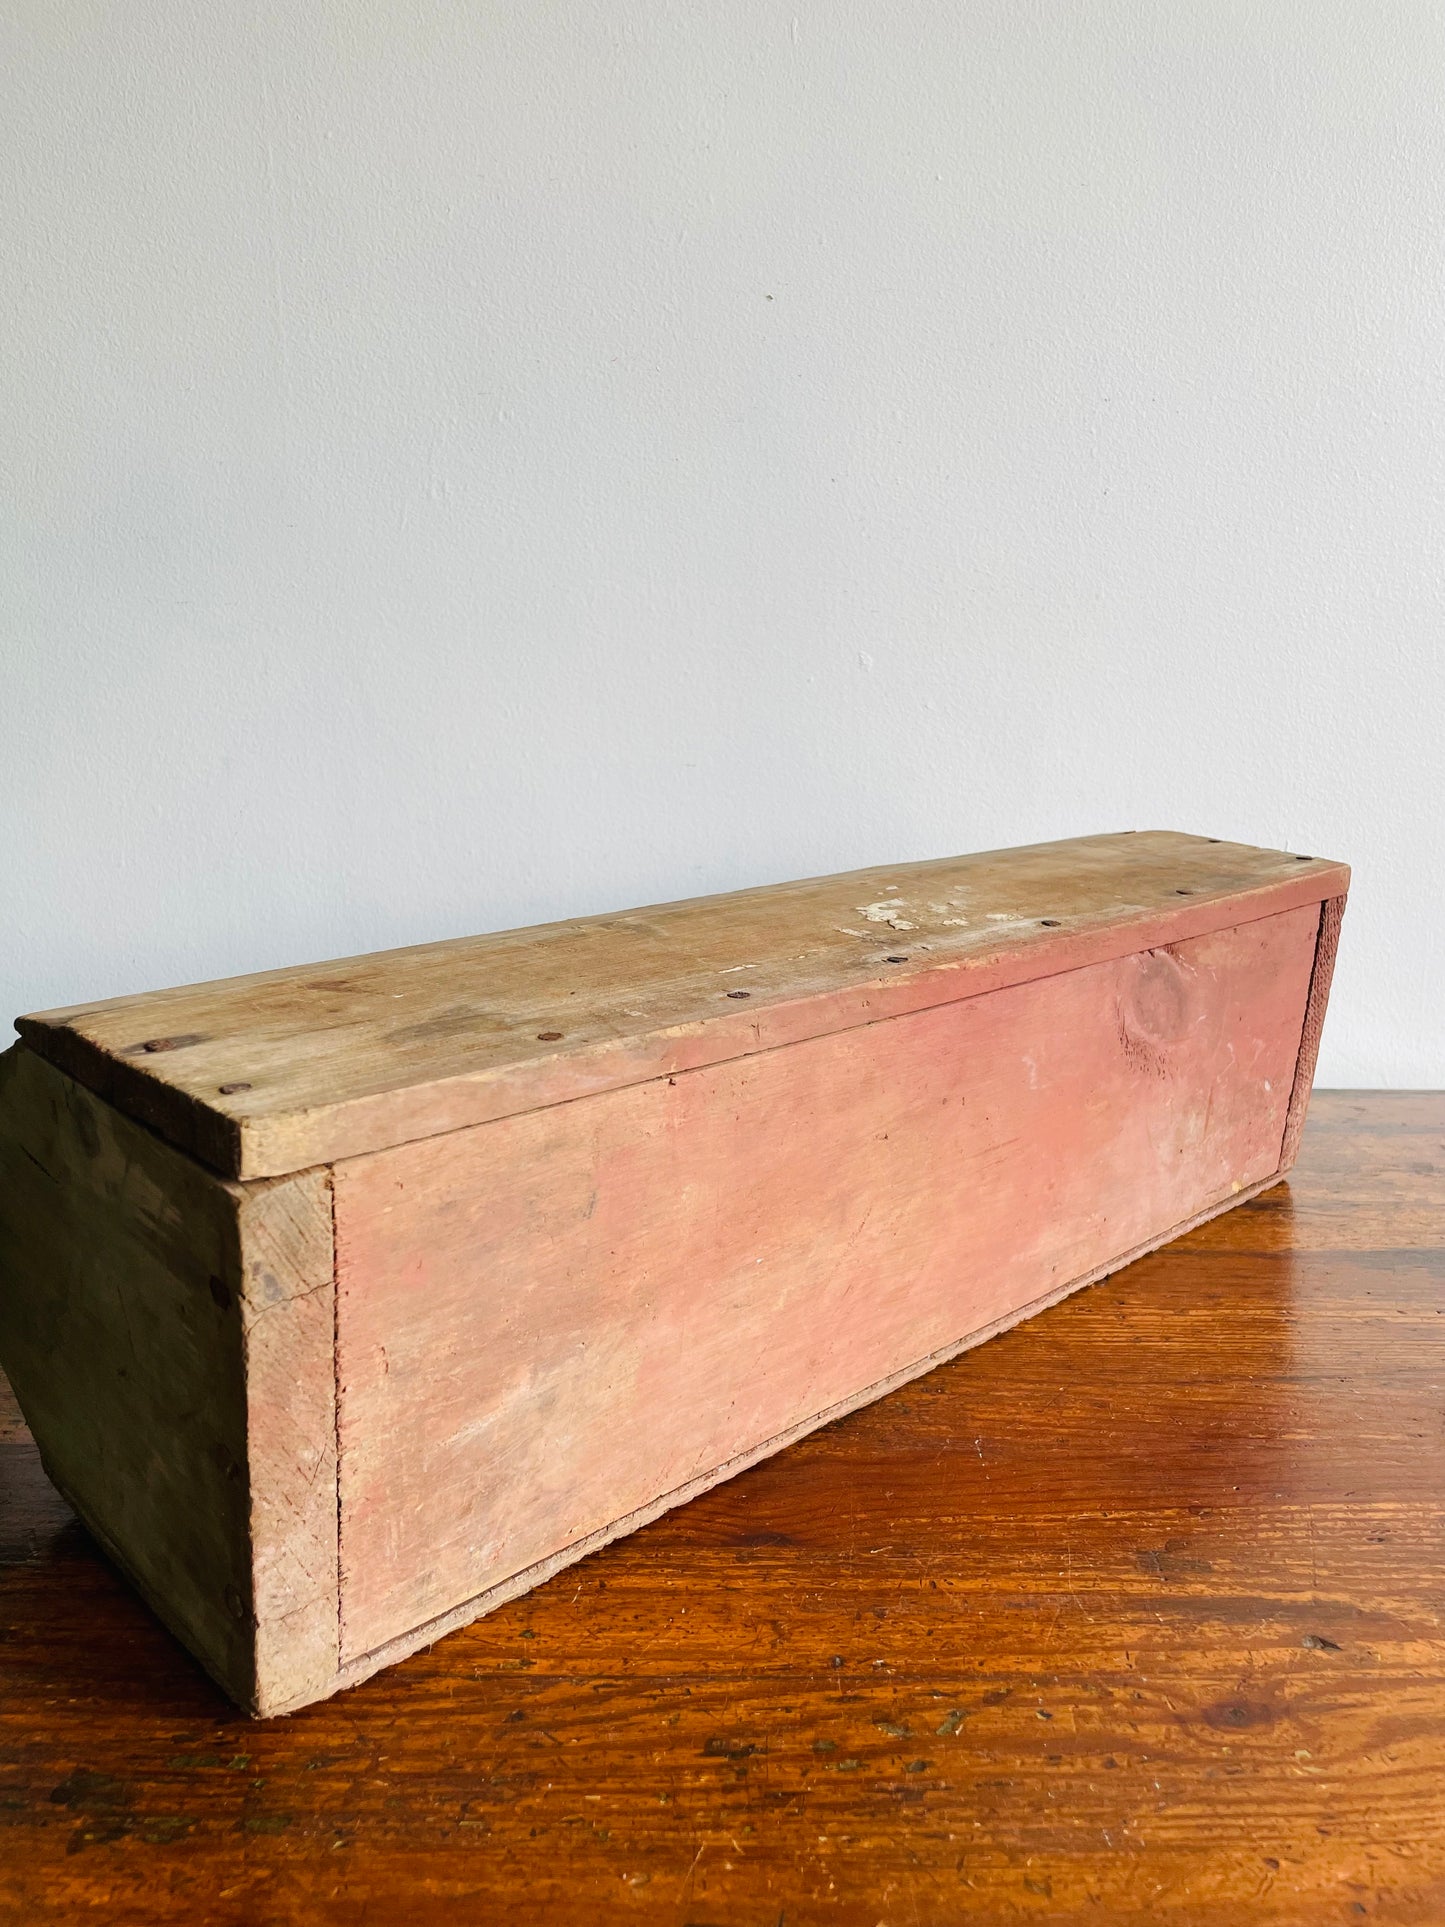 Rustic Wooden Toolbox Caddy with Leather Strap Handle - Planter, Centrepiece, Storage, Tools, Etc.!